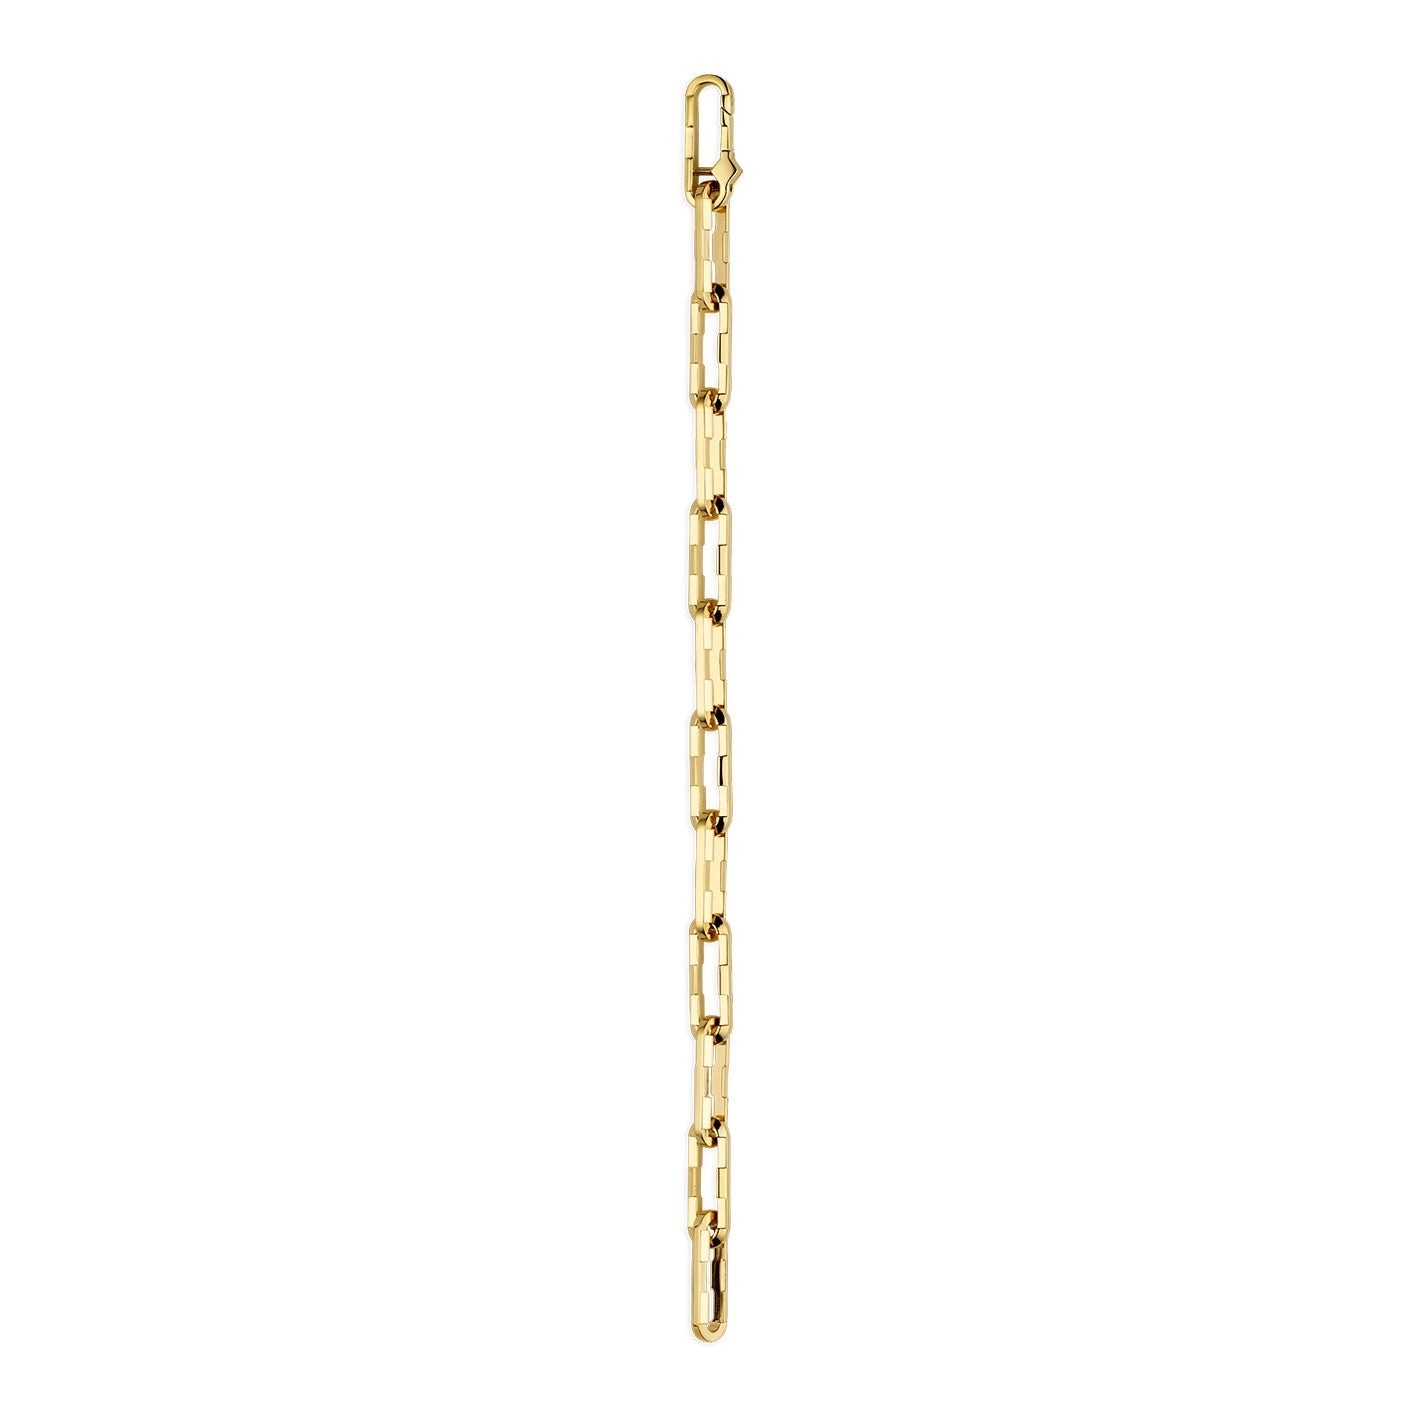 Gucci Link to Love 18K Yellow Gold Wide Chain Bracelet